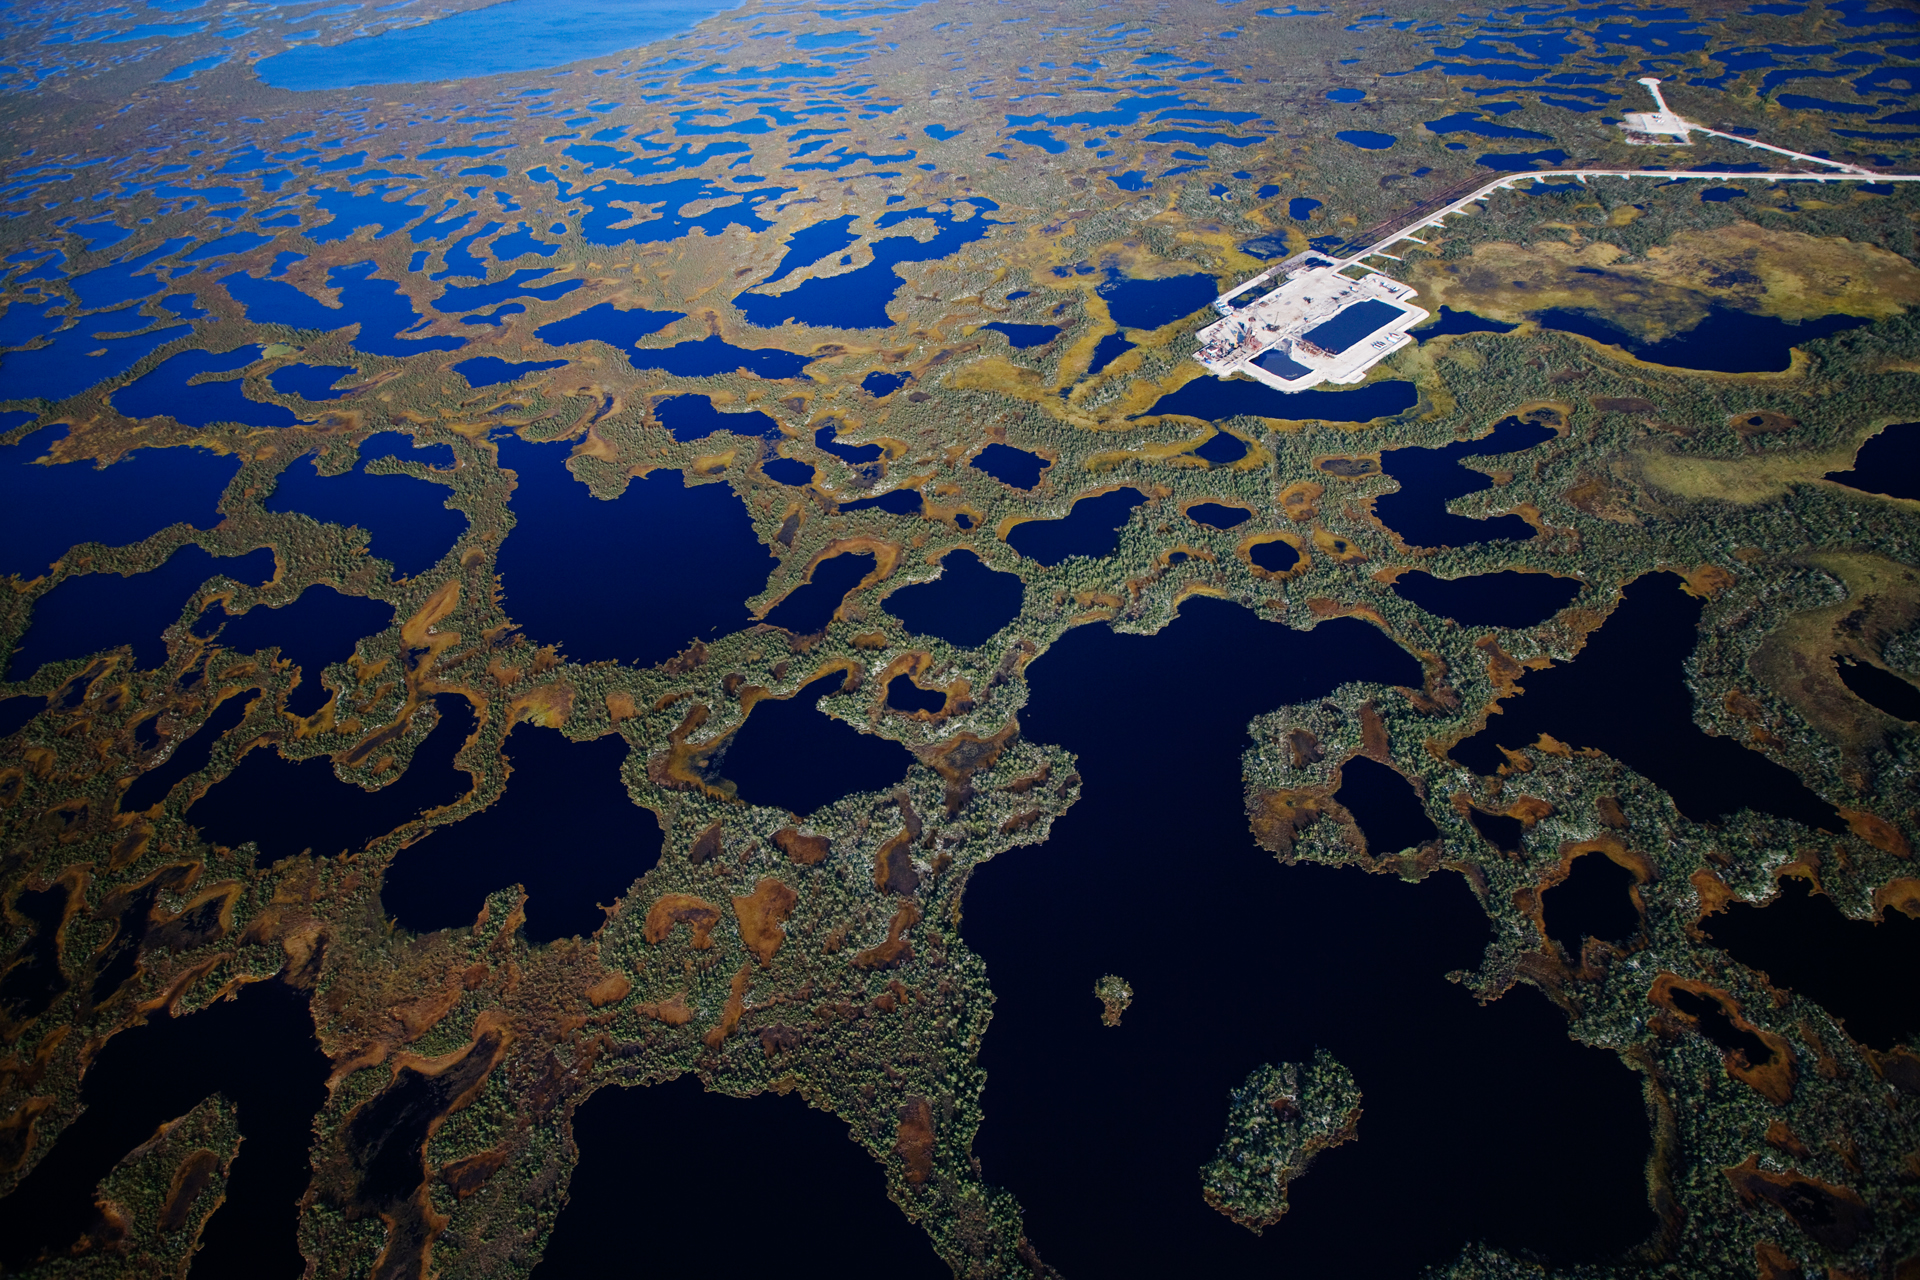  Near Kogalym, a LUKoil drill pad built atop fragile wetlands probes for new oil reserves.  Khanty-Mansiysk Region, Russia  